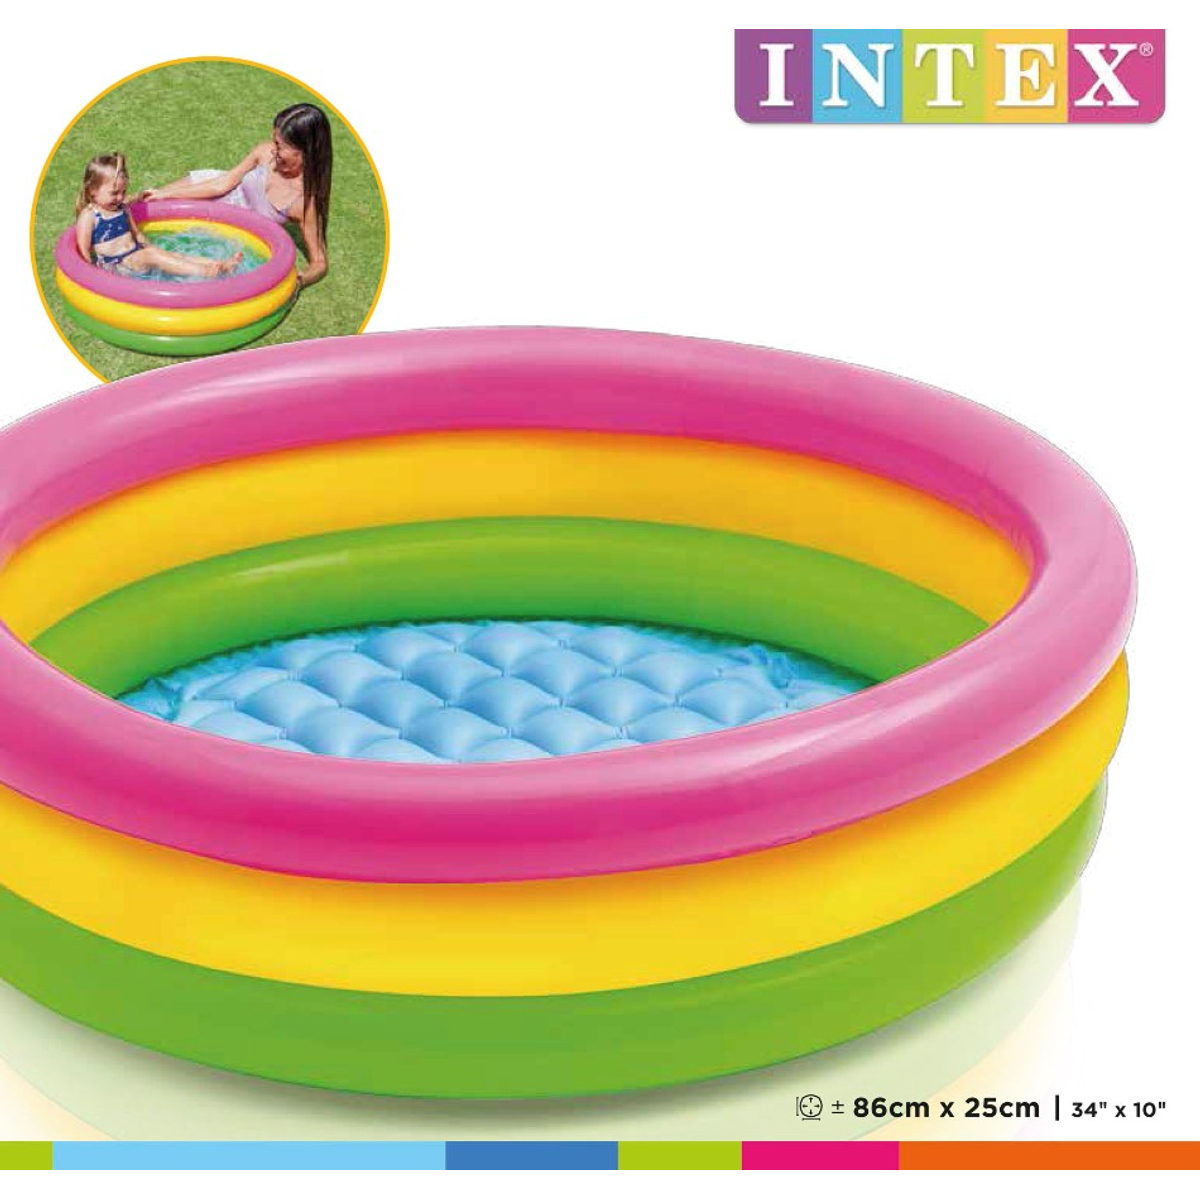 Intex 58924 Piscine gonflable Sunset Glow